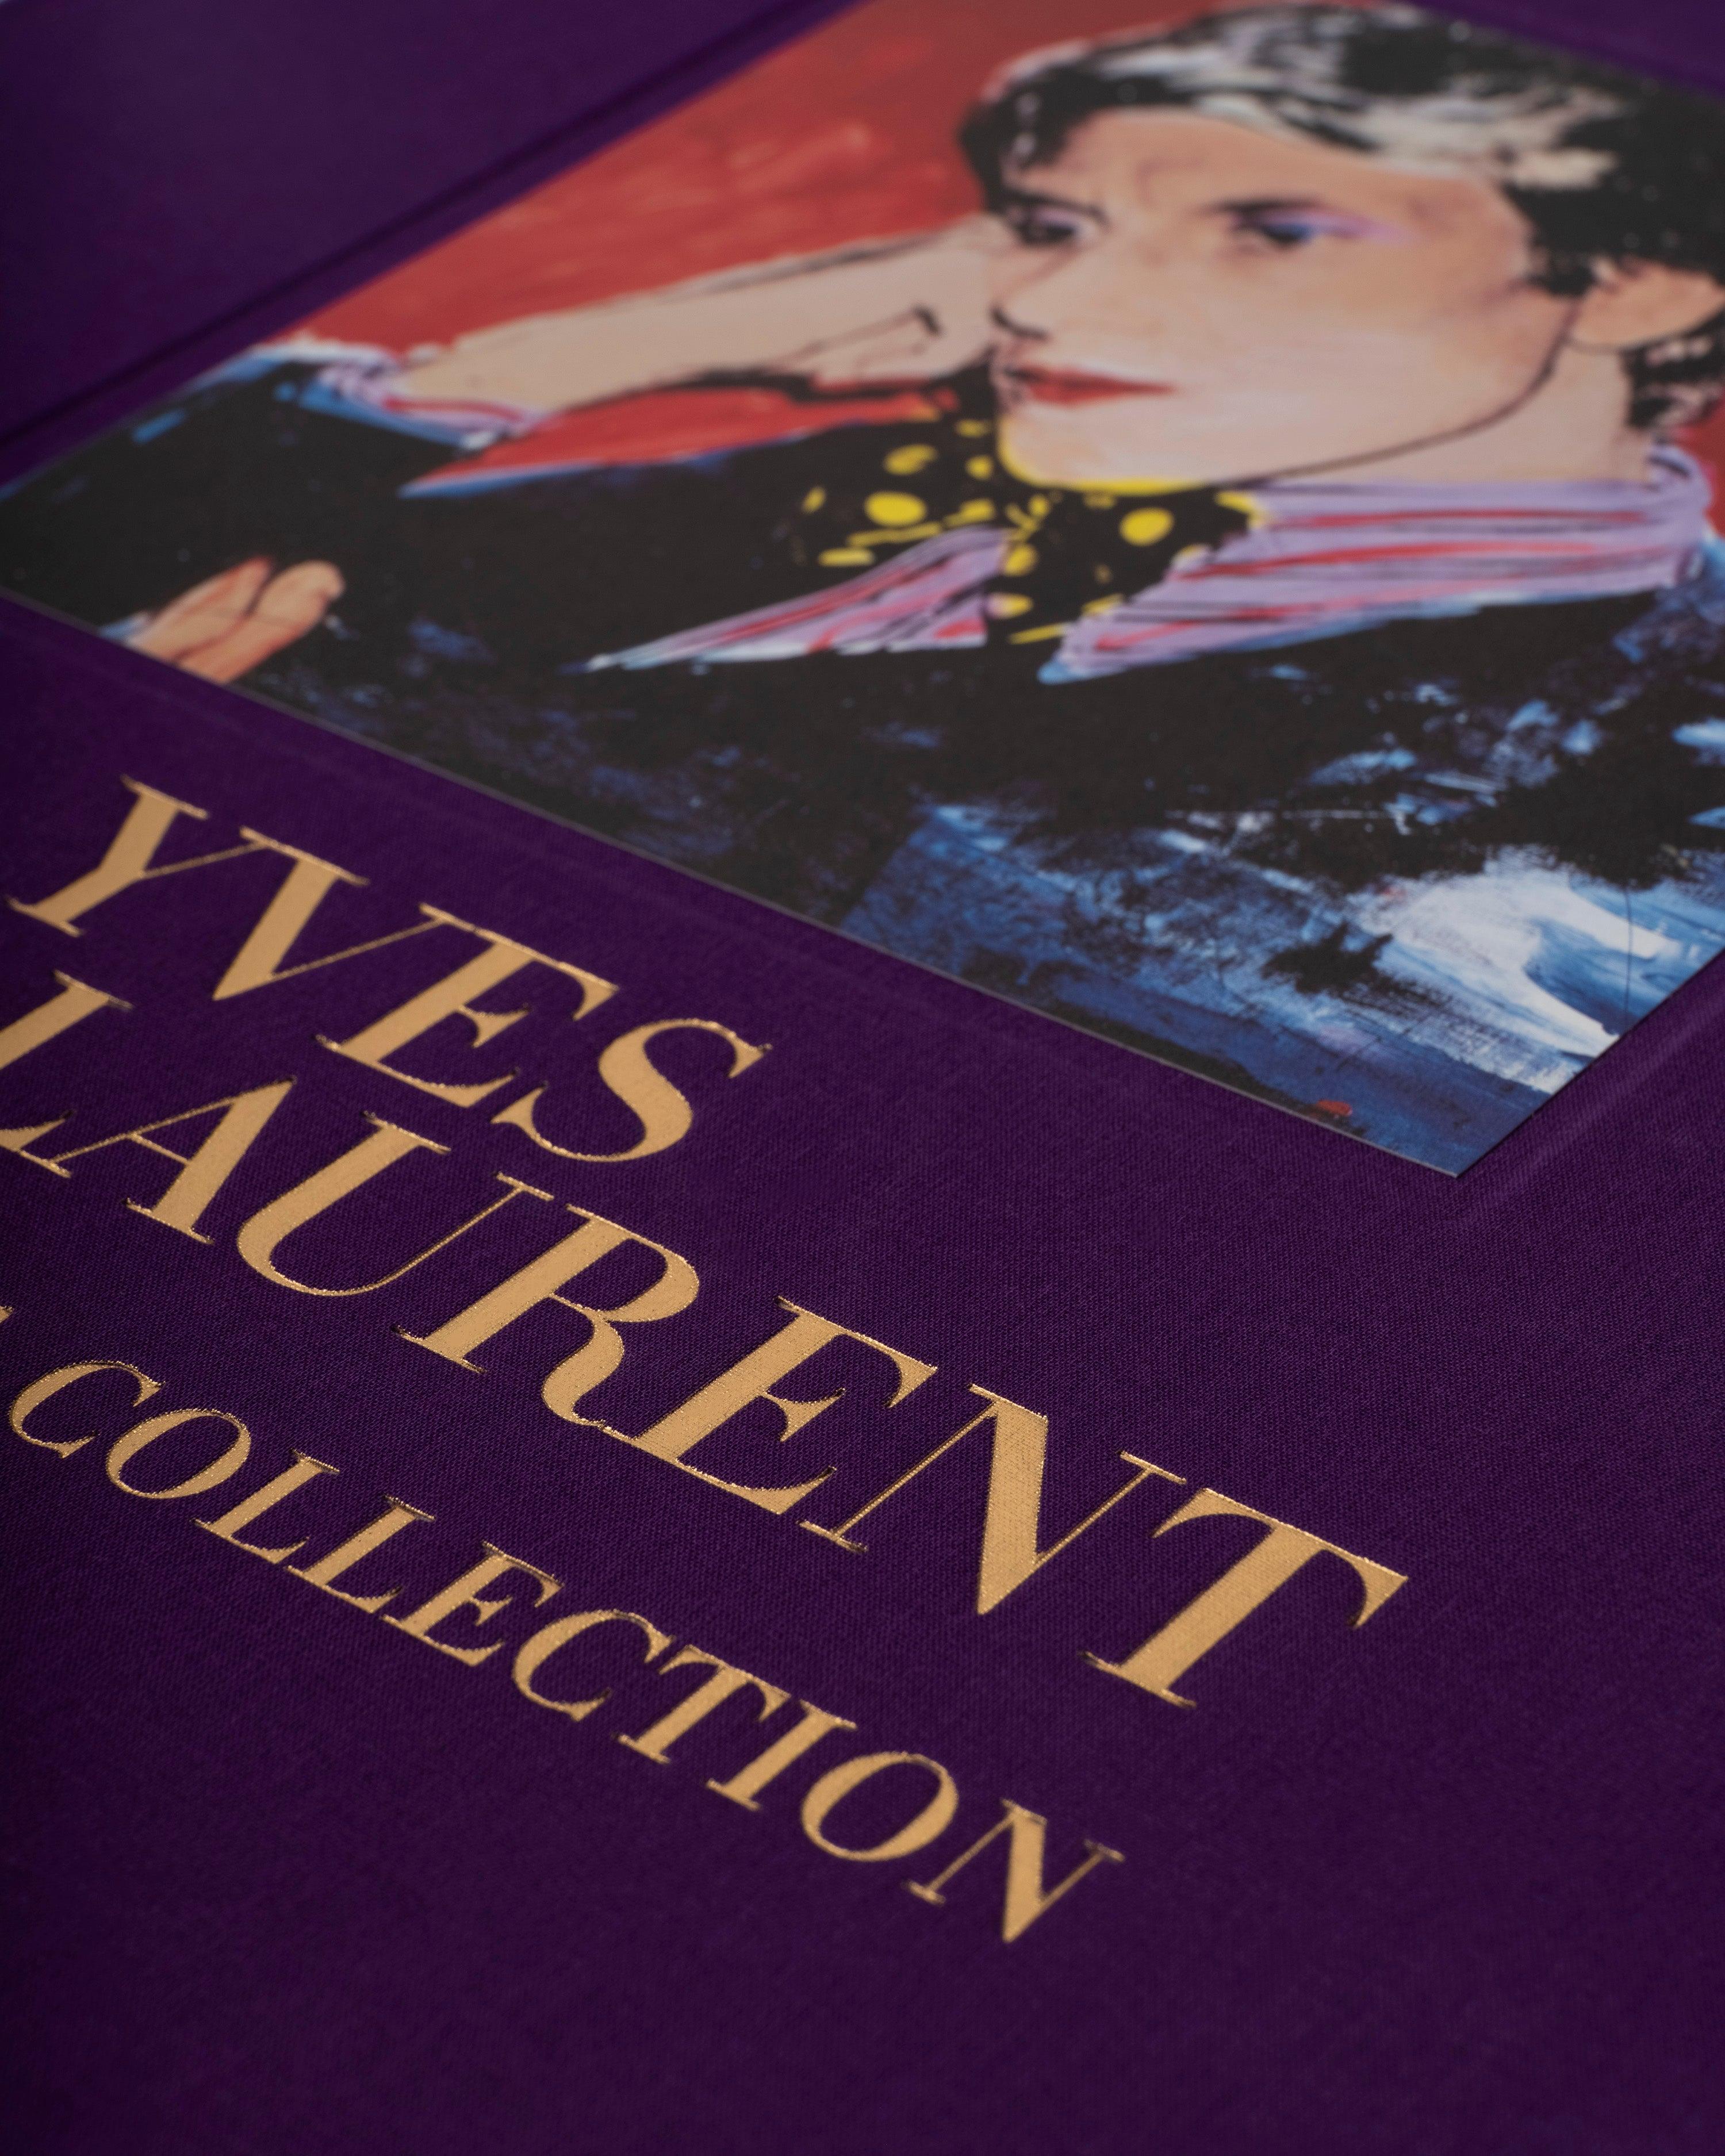 Yves Saint-Laurent: The Impossible Collection book by ASSOULINE 